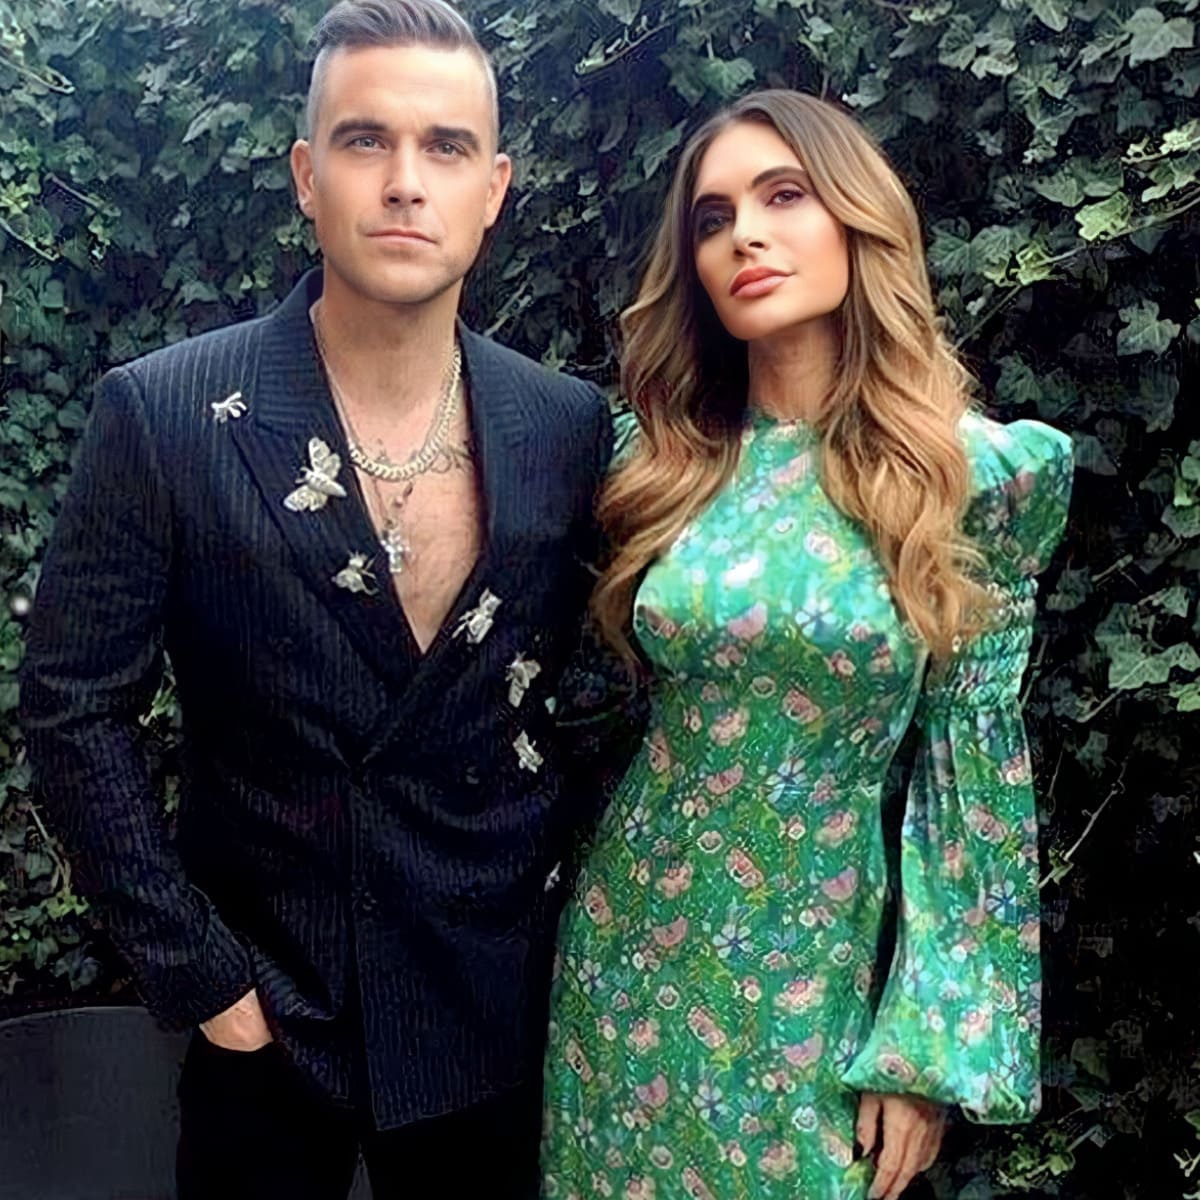 Robbie Williams and his wife Ida Field.